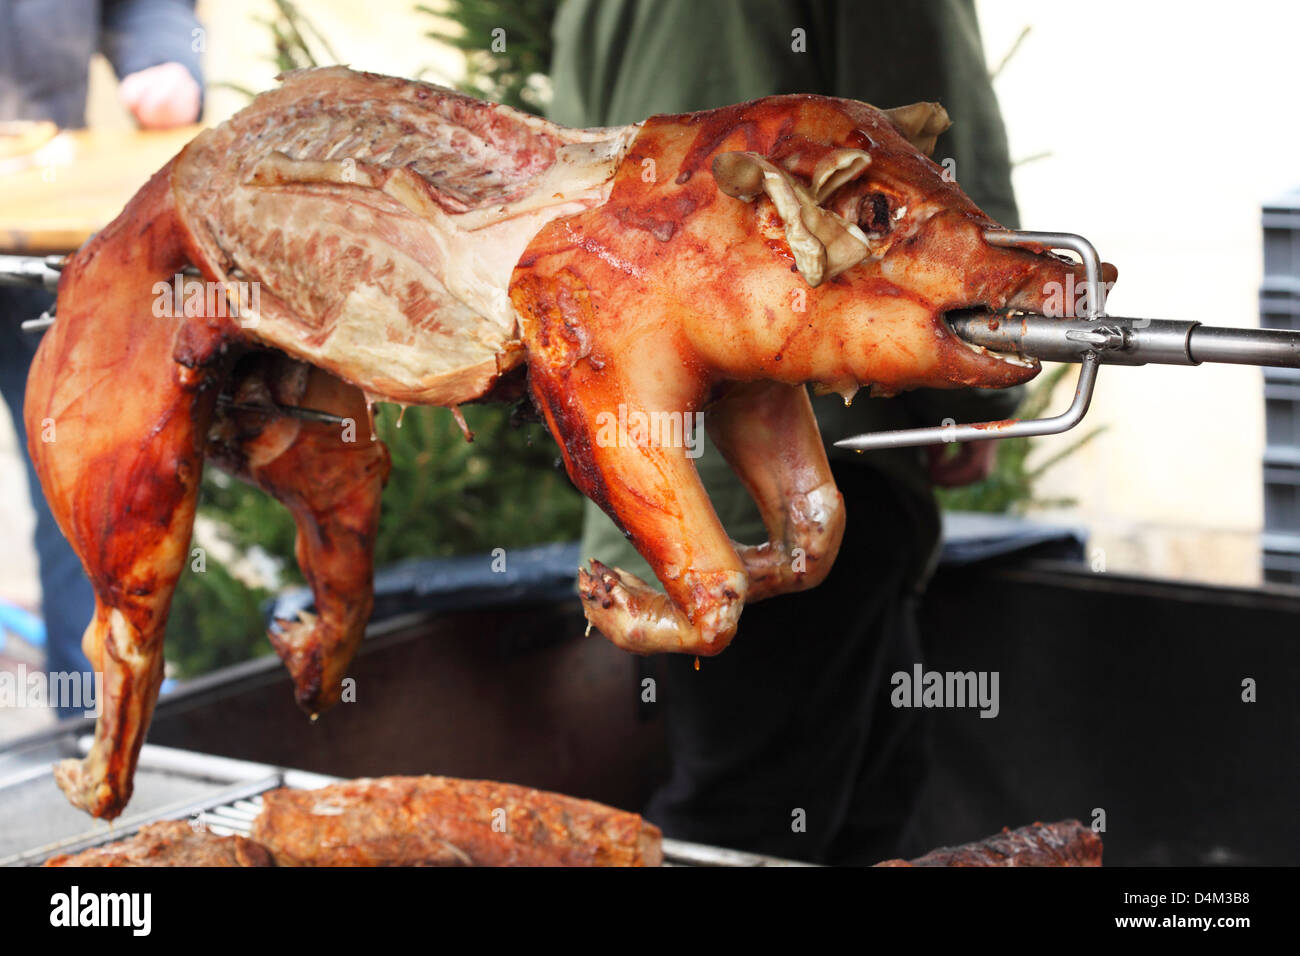 A roast piglet on a spit at the Christmas Market (Weihnachtsmarkt) in Esslingen, Germany. Stock Photo